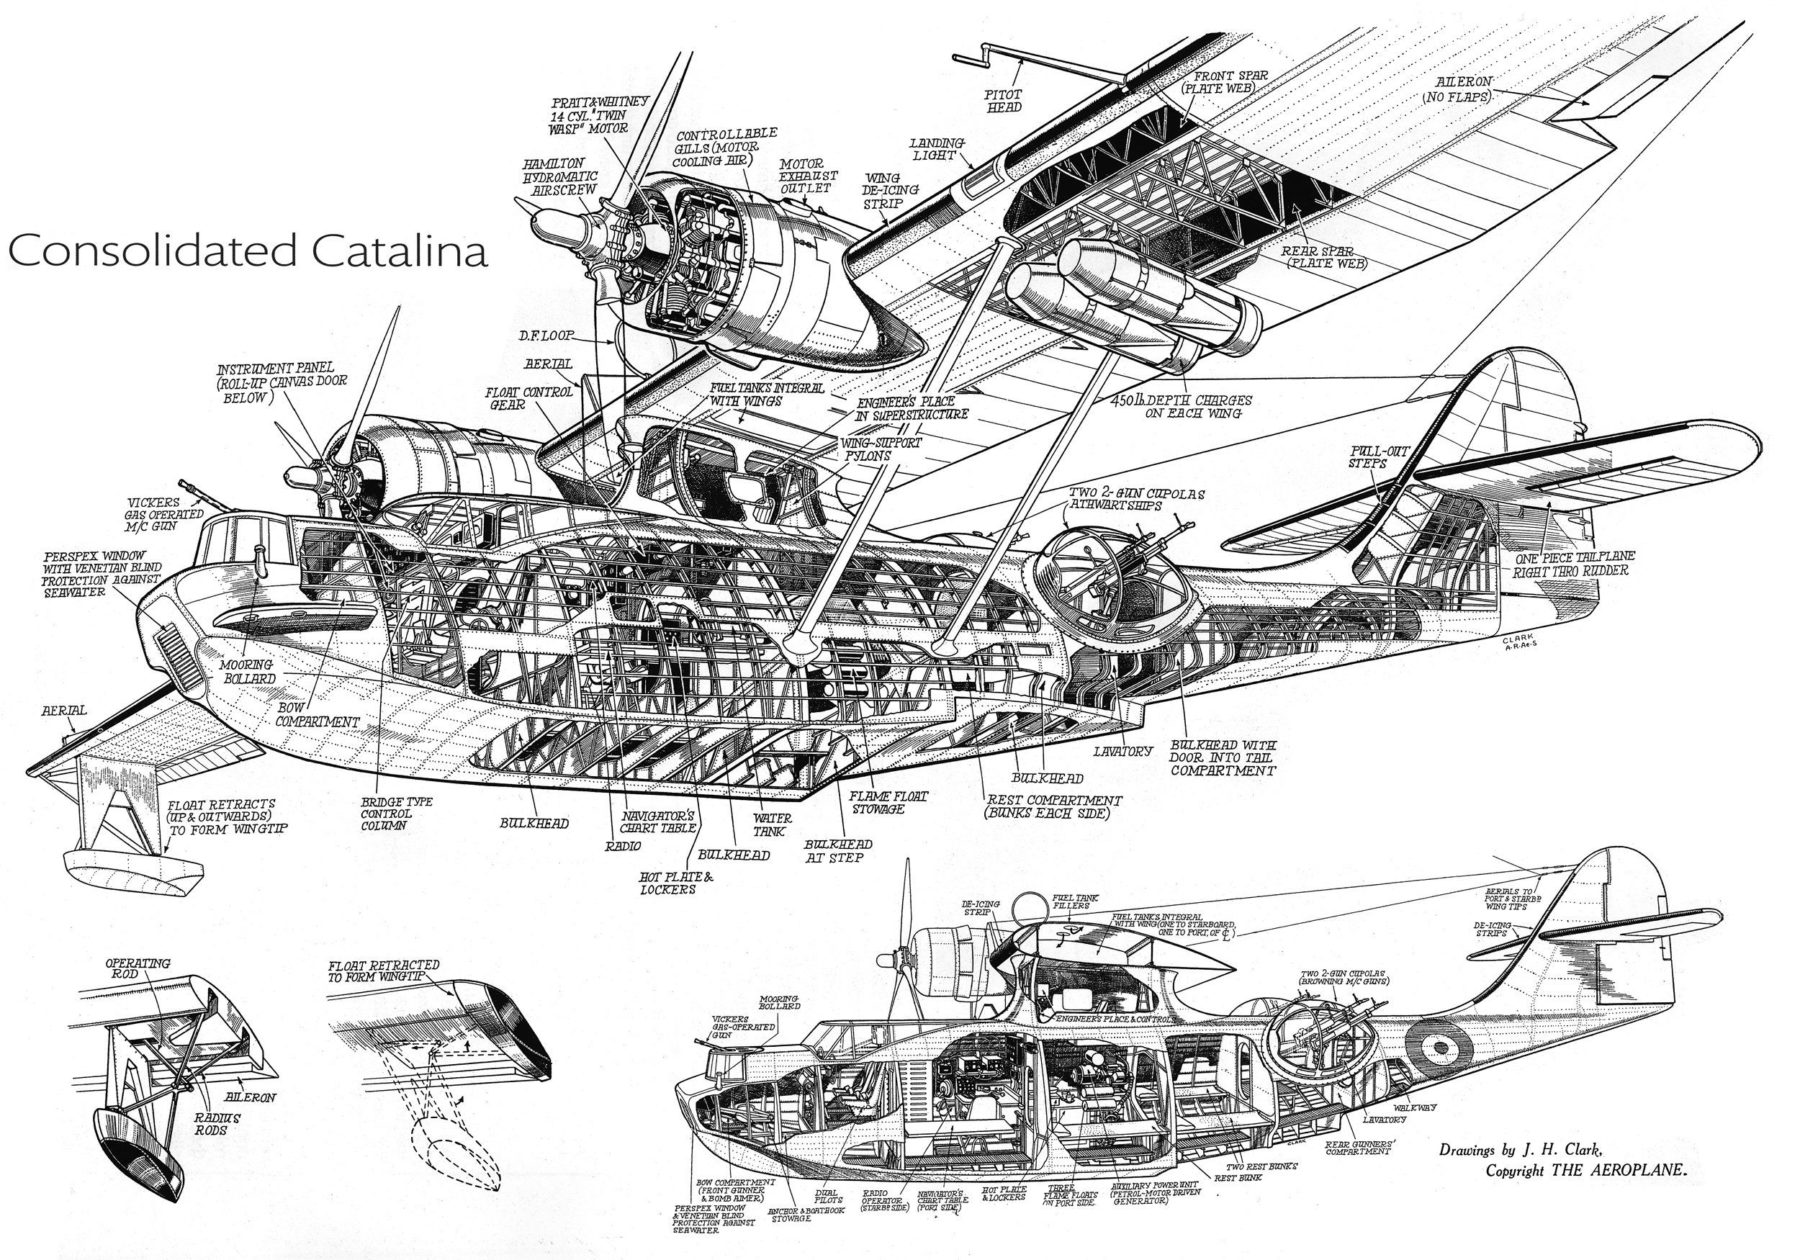 cutaway showing the interior of the PBY